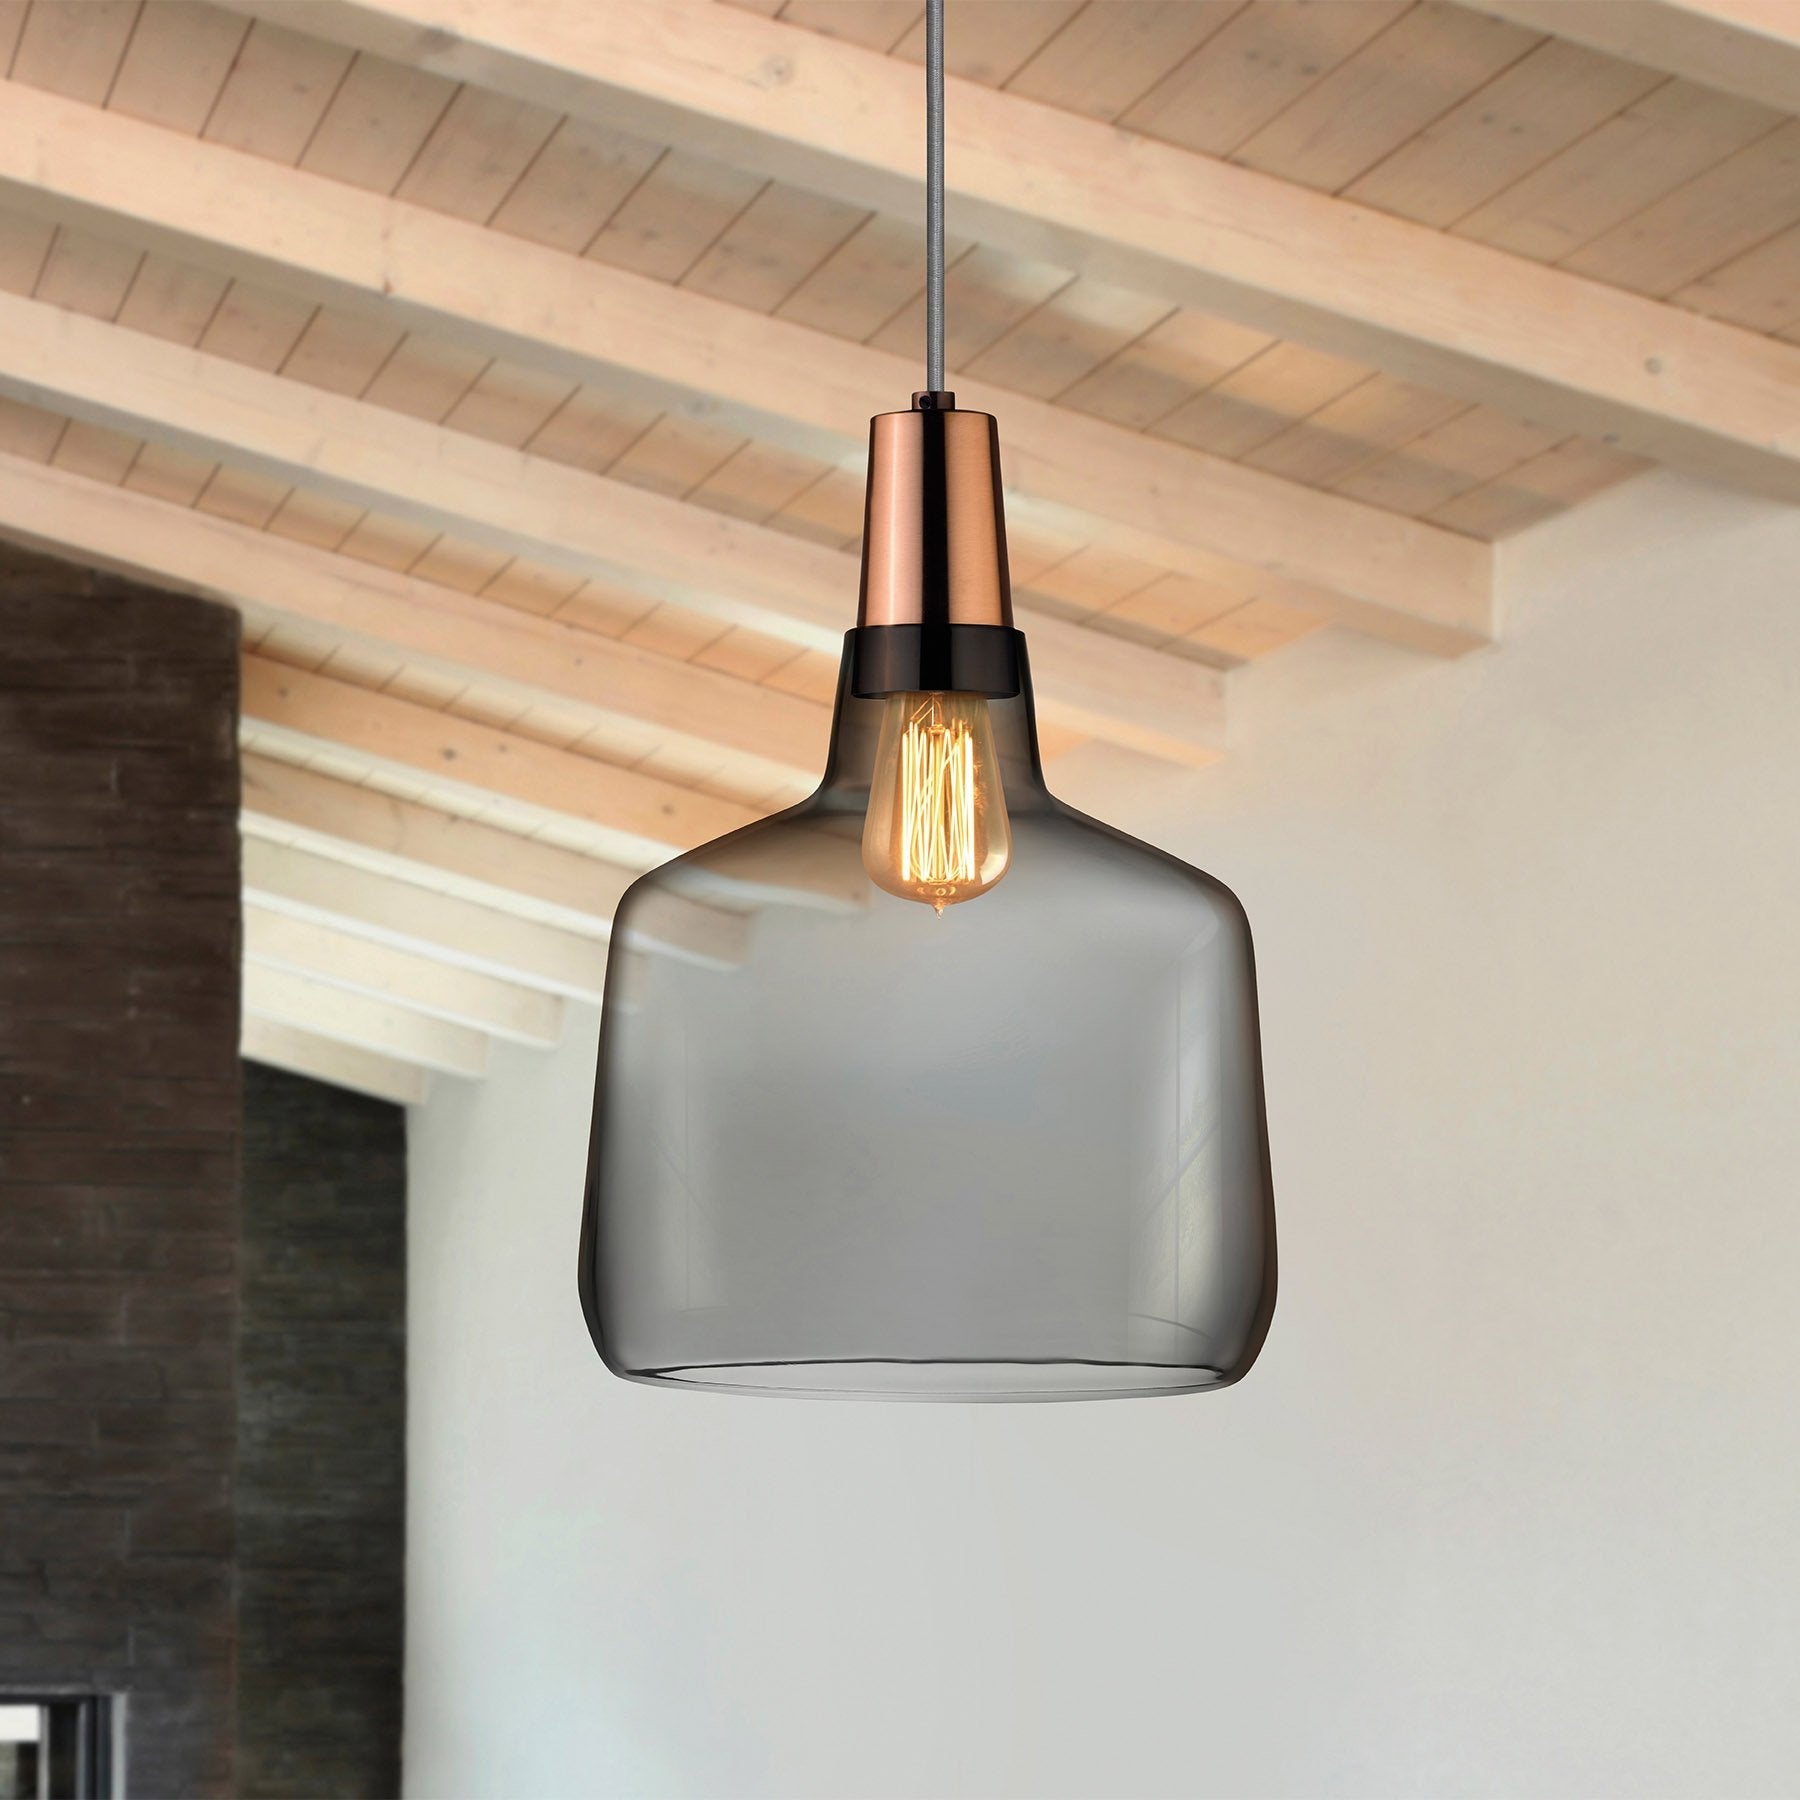 mono lamp by nude at adorn.house